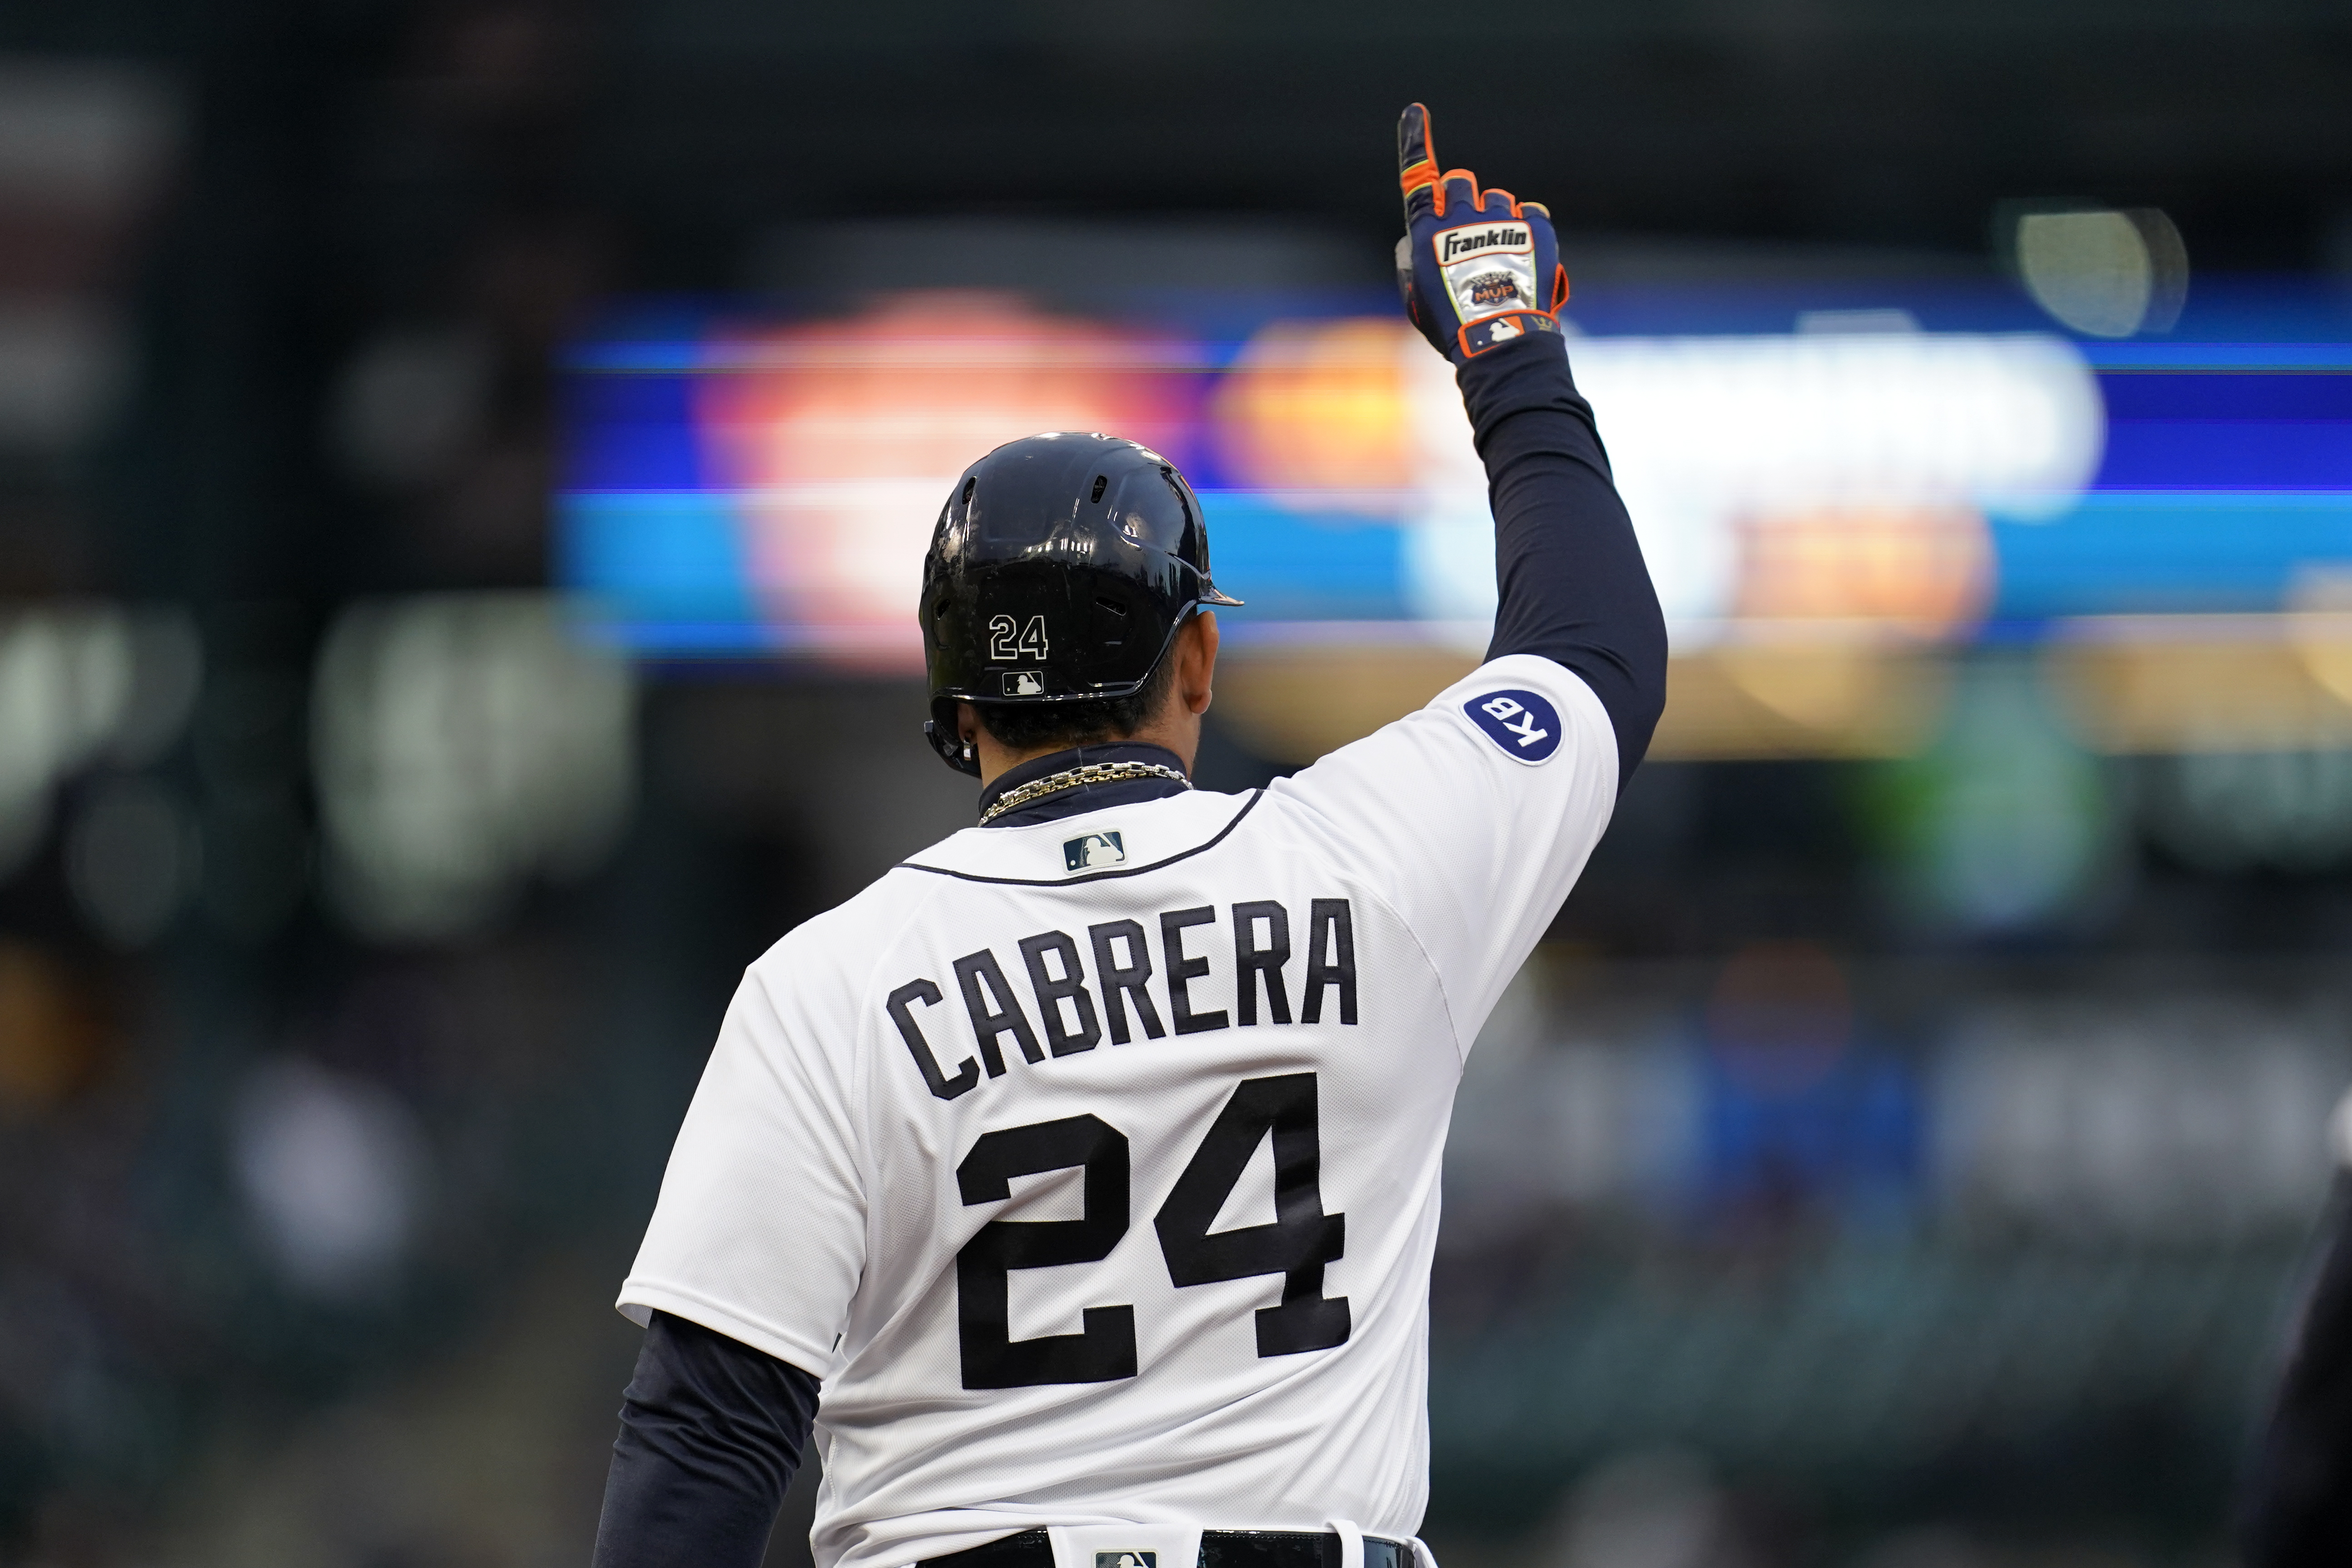 Detroit Tigers fans robbed when Yankees walked Miguel Cabrera